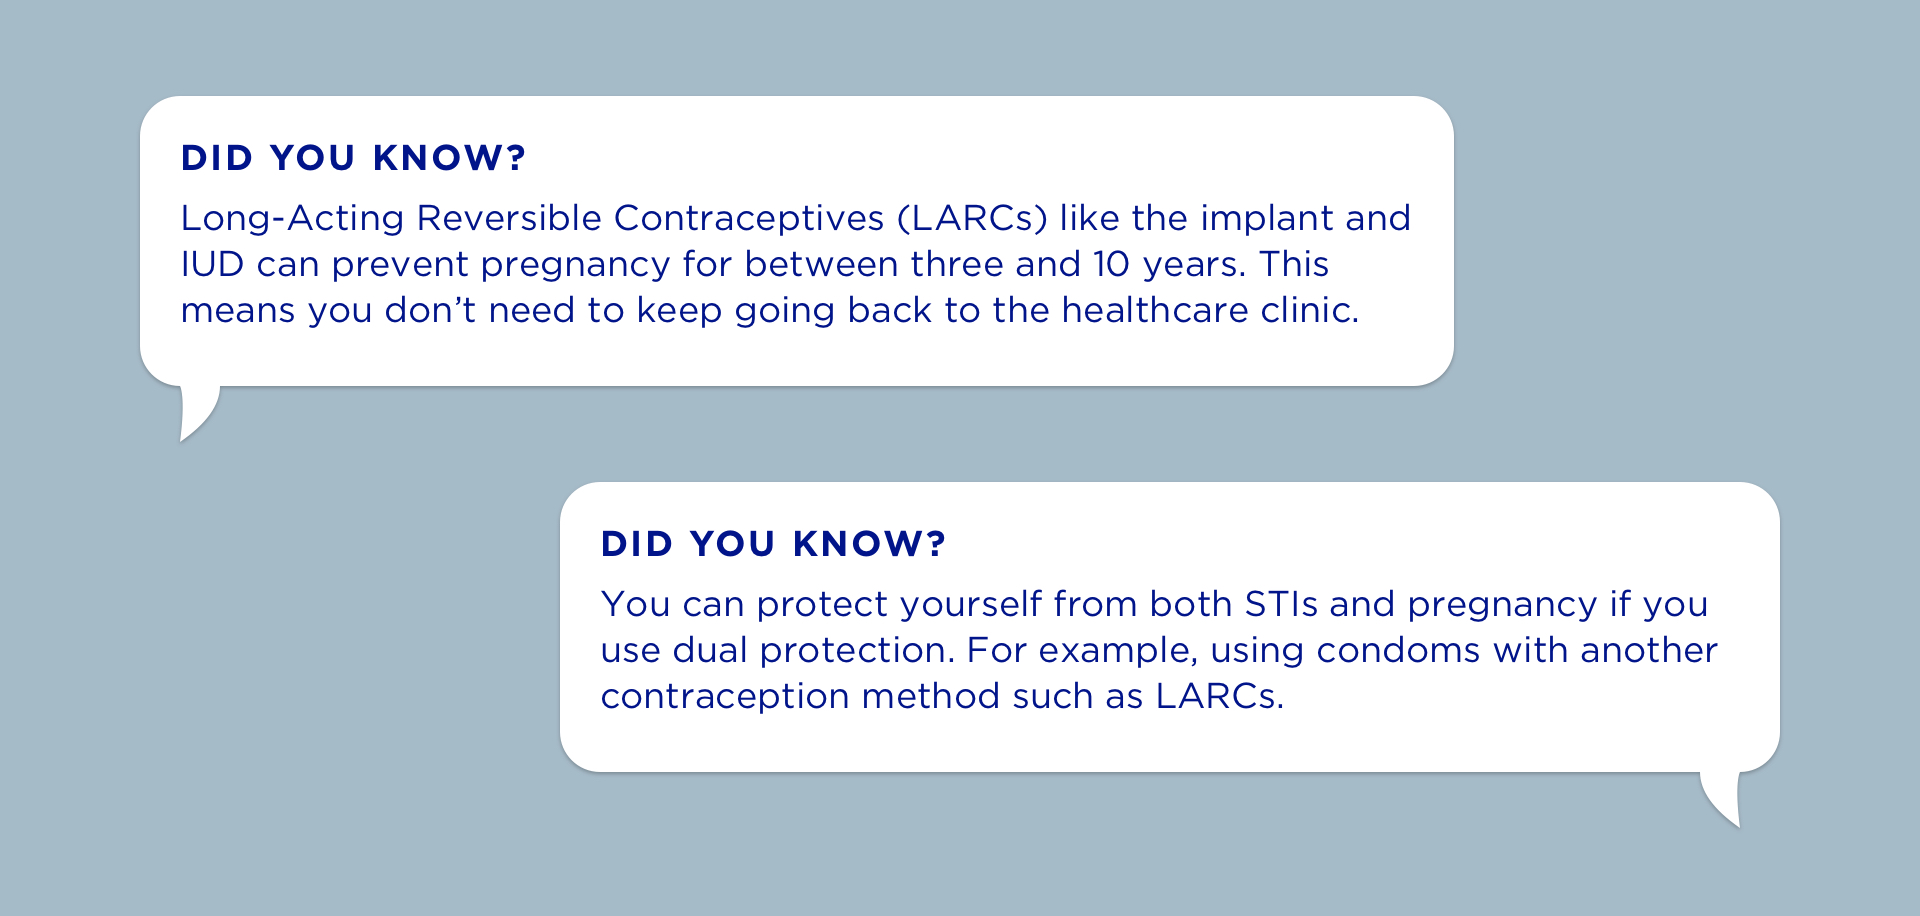 DID YOU KNOW? Long-Acting Reversible Contraceptives (LARCs) like the implant and IUD can prevent pregnancy for between three and 10 years. This means you don’t need to keep going back to the healthcare clinic.